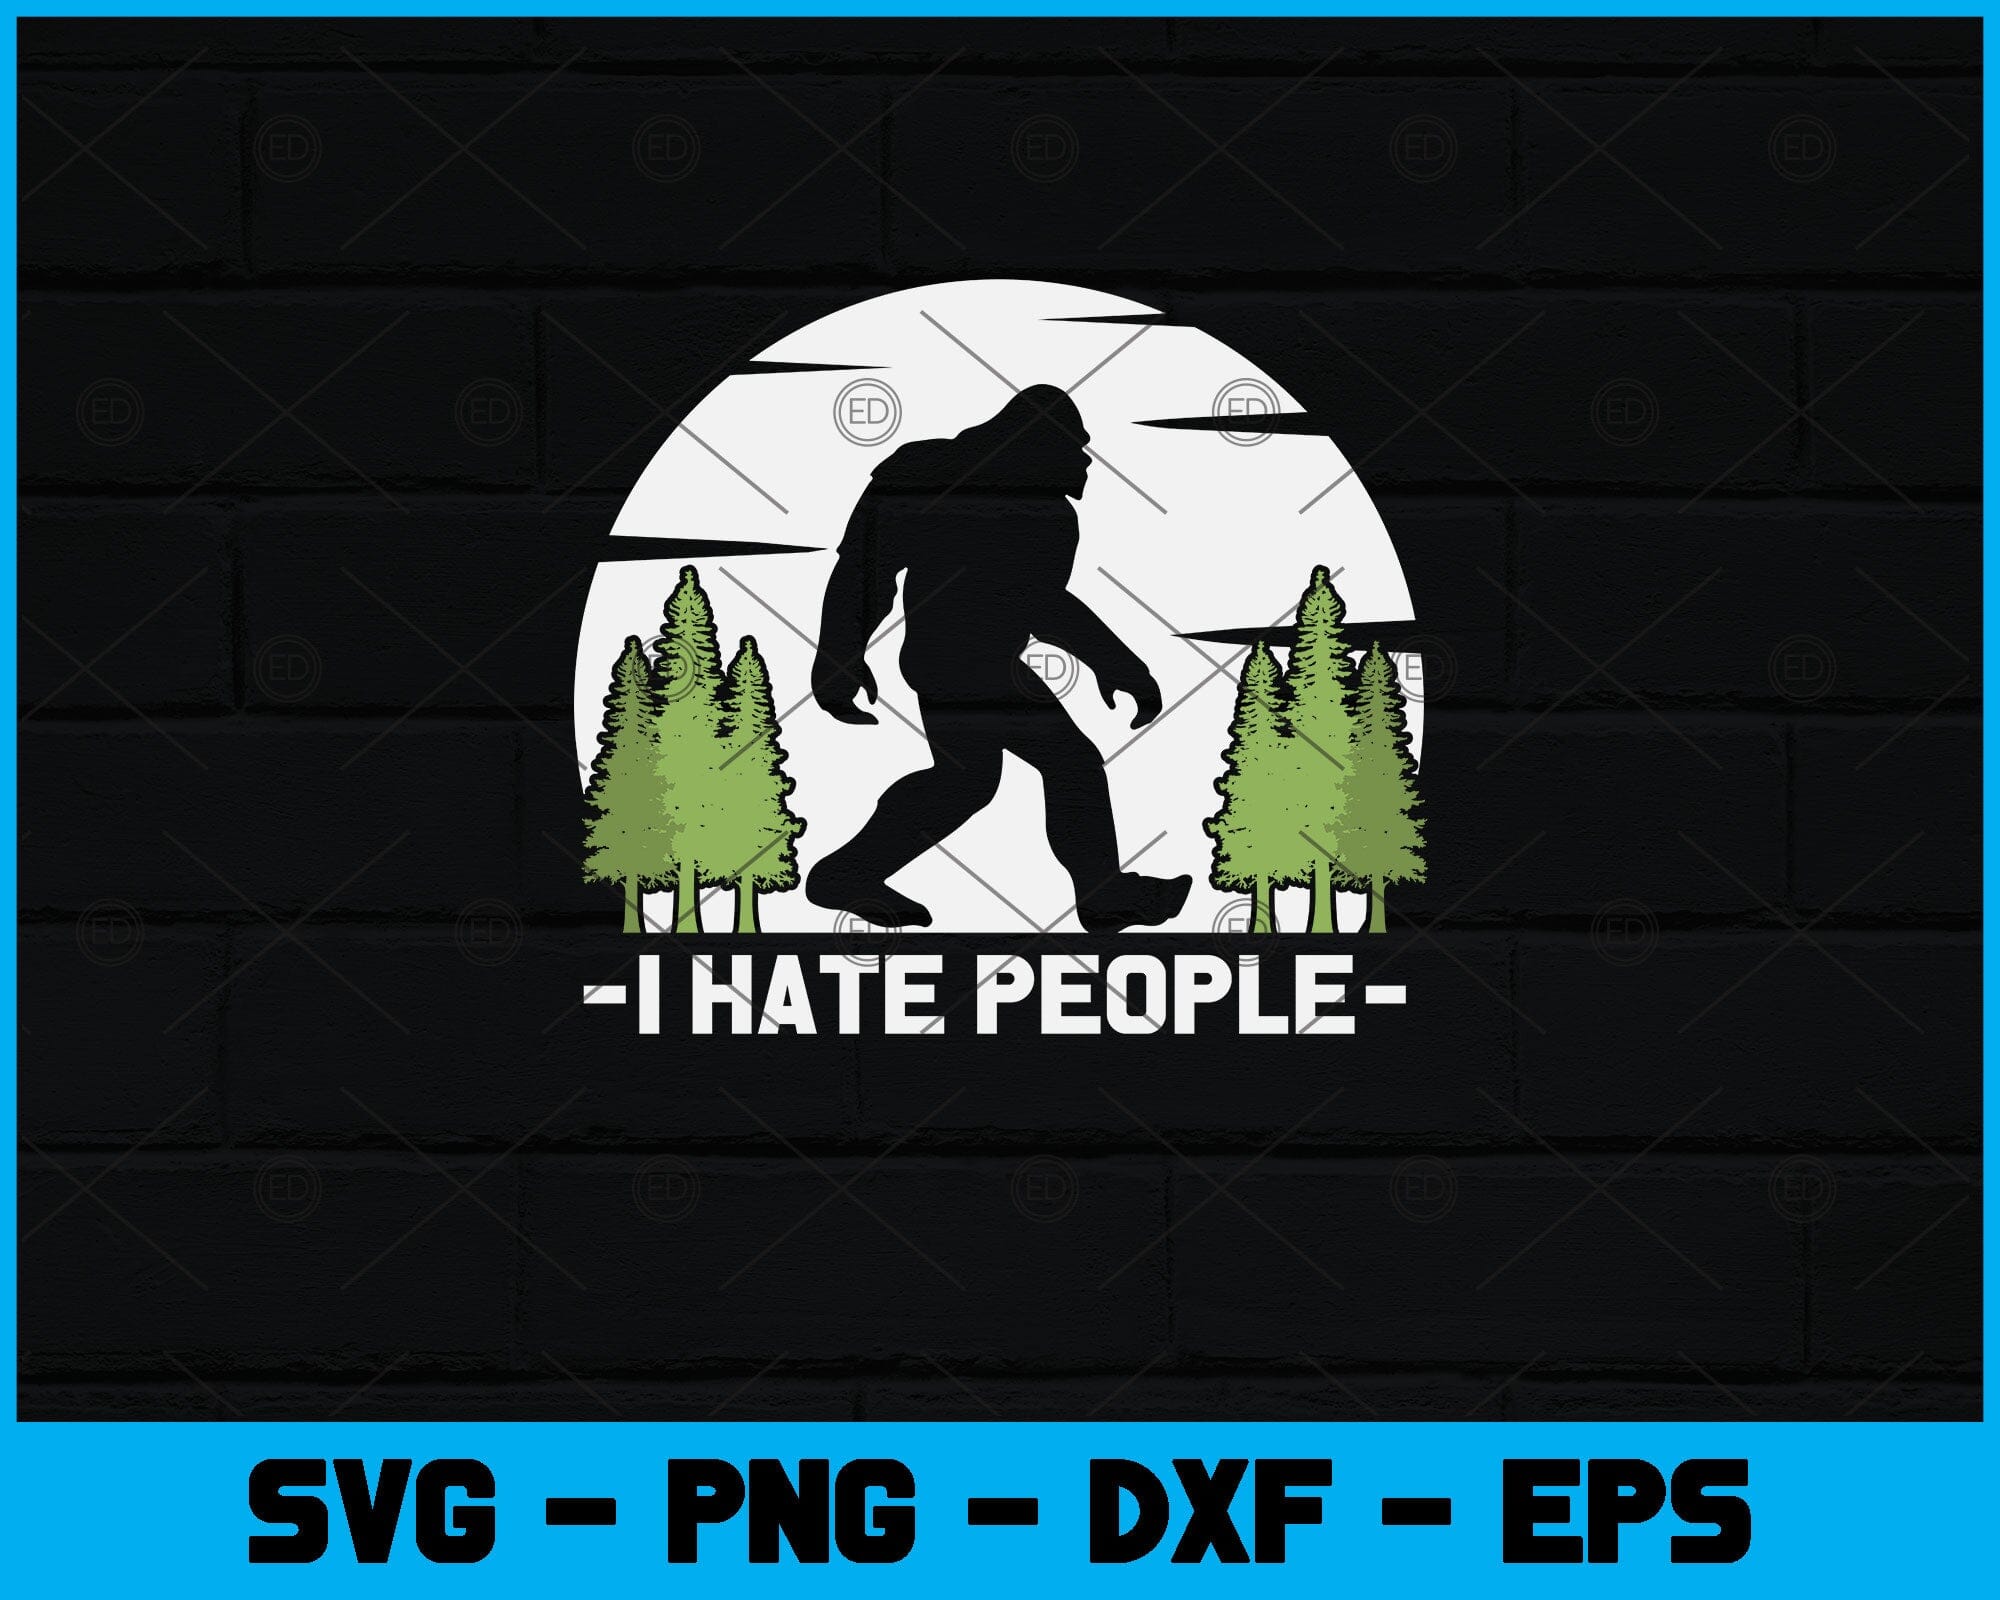 Hate Free Zone Vector Logo - Download Free SVG Icon